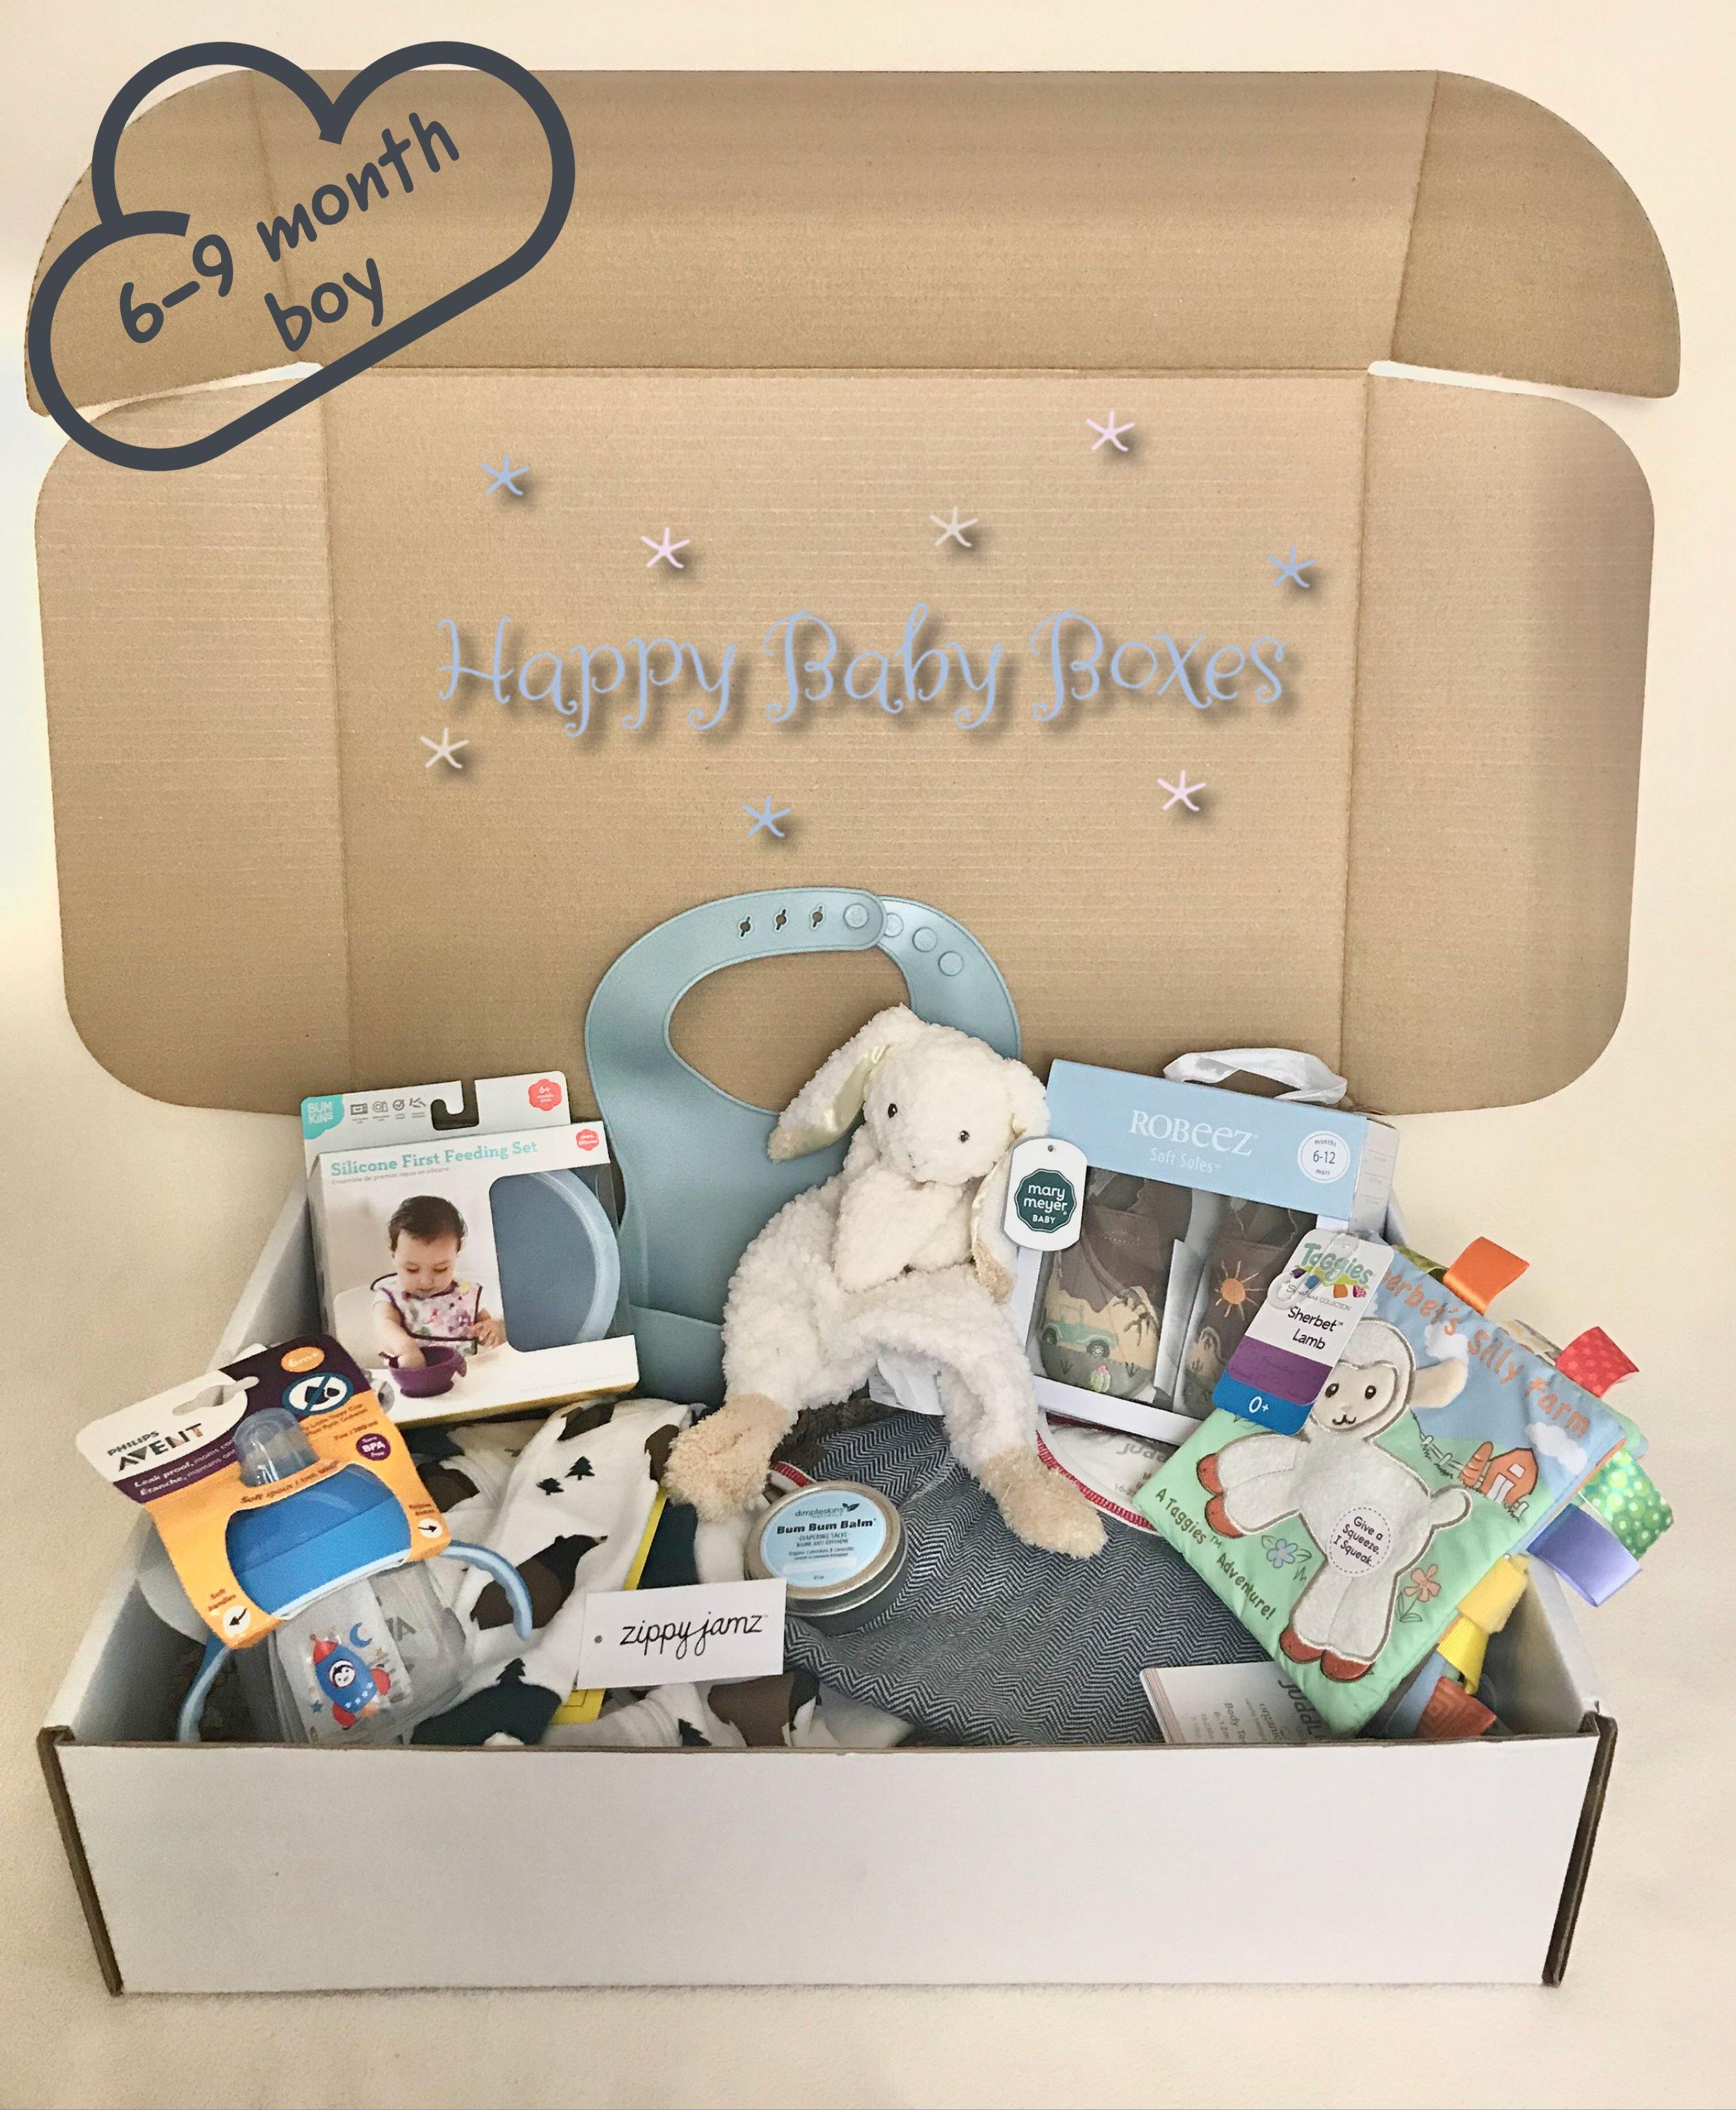 6-9 Month Baby Box - Happy Baby Boxes